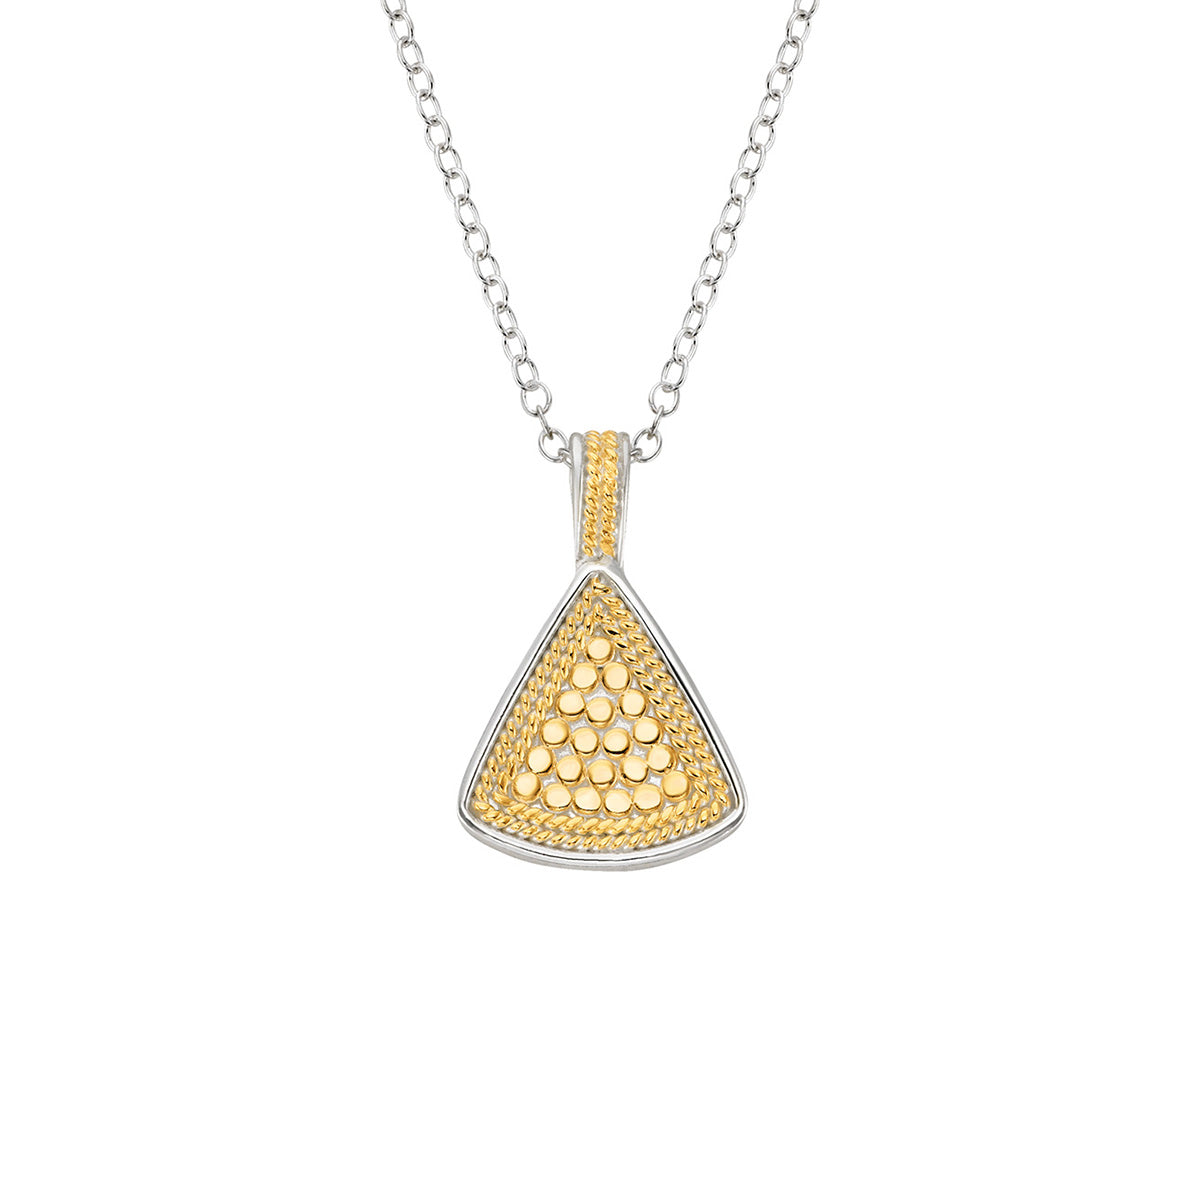 Ana Beck 18k gold plated and sterling silver Reversible Triangle Drop Necklace